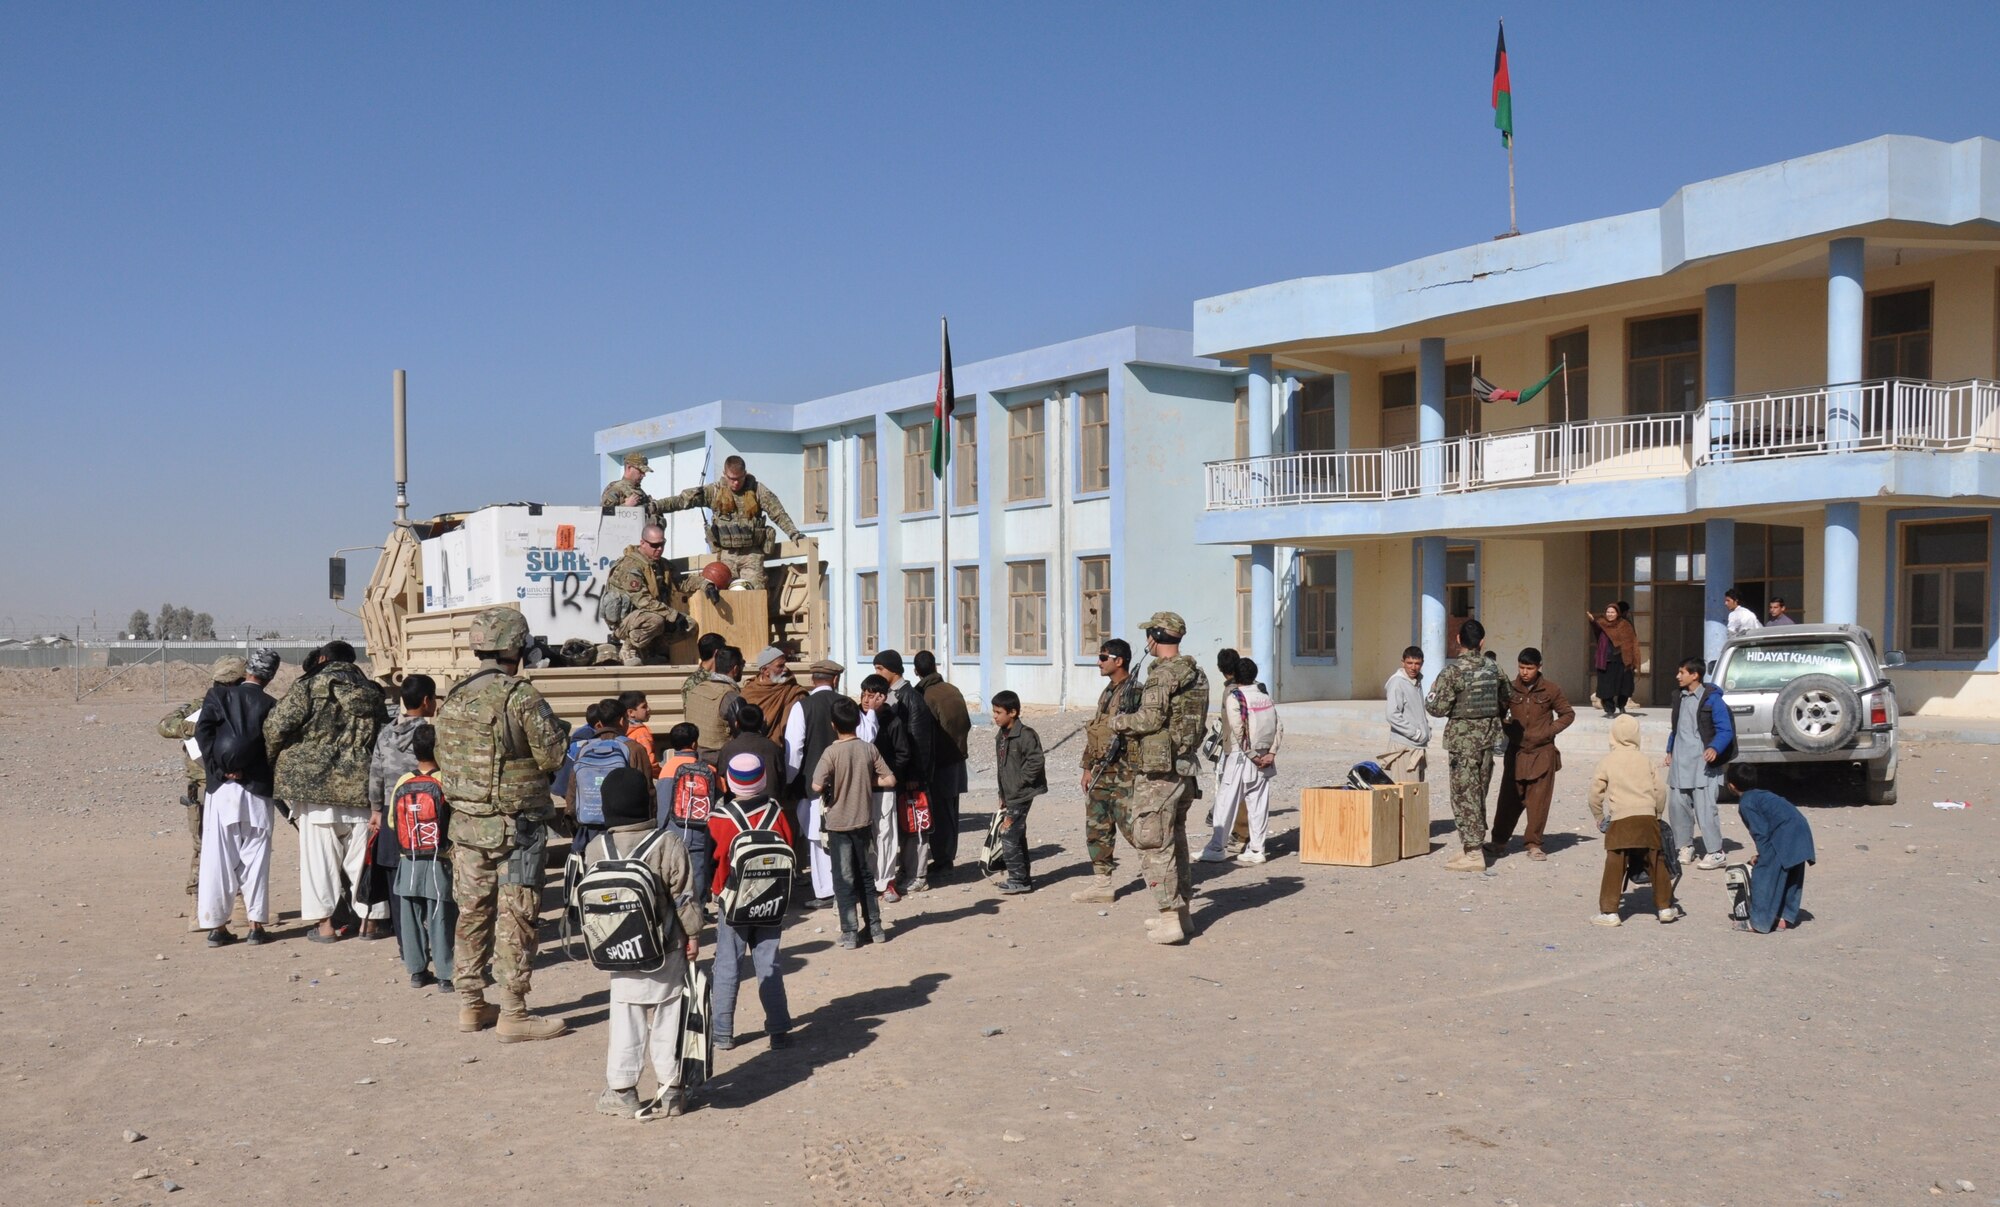 Afghan Air Force security forces airmen with the Kandahar Air Wing hand out school supplies at a school near Kandahar Airfield on Jan. 24. The mission was led by the Afghans and carried out with logistical and security support from Coalition forces. (U.S. Air Force photo/Capt. Tristan Hinderliter)